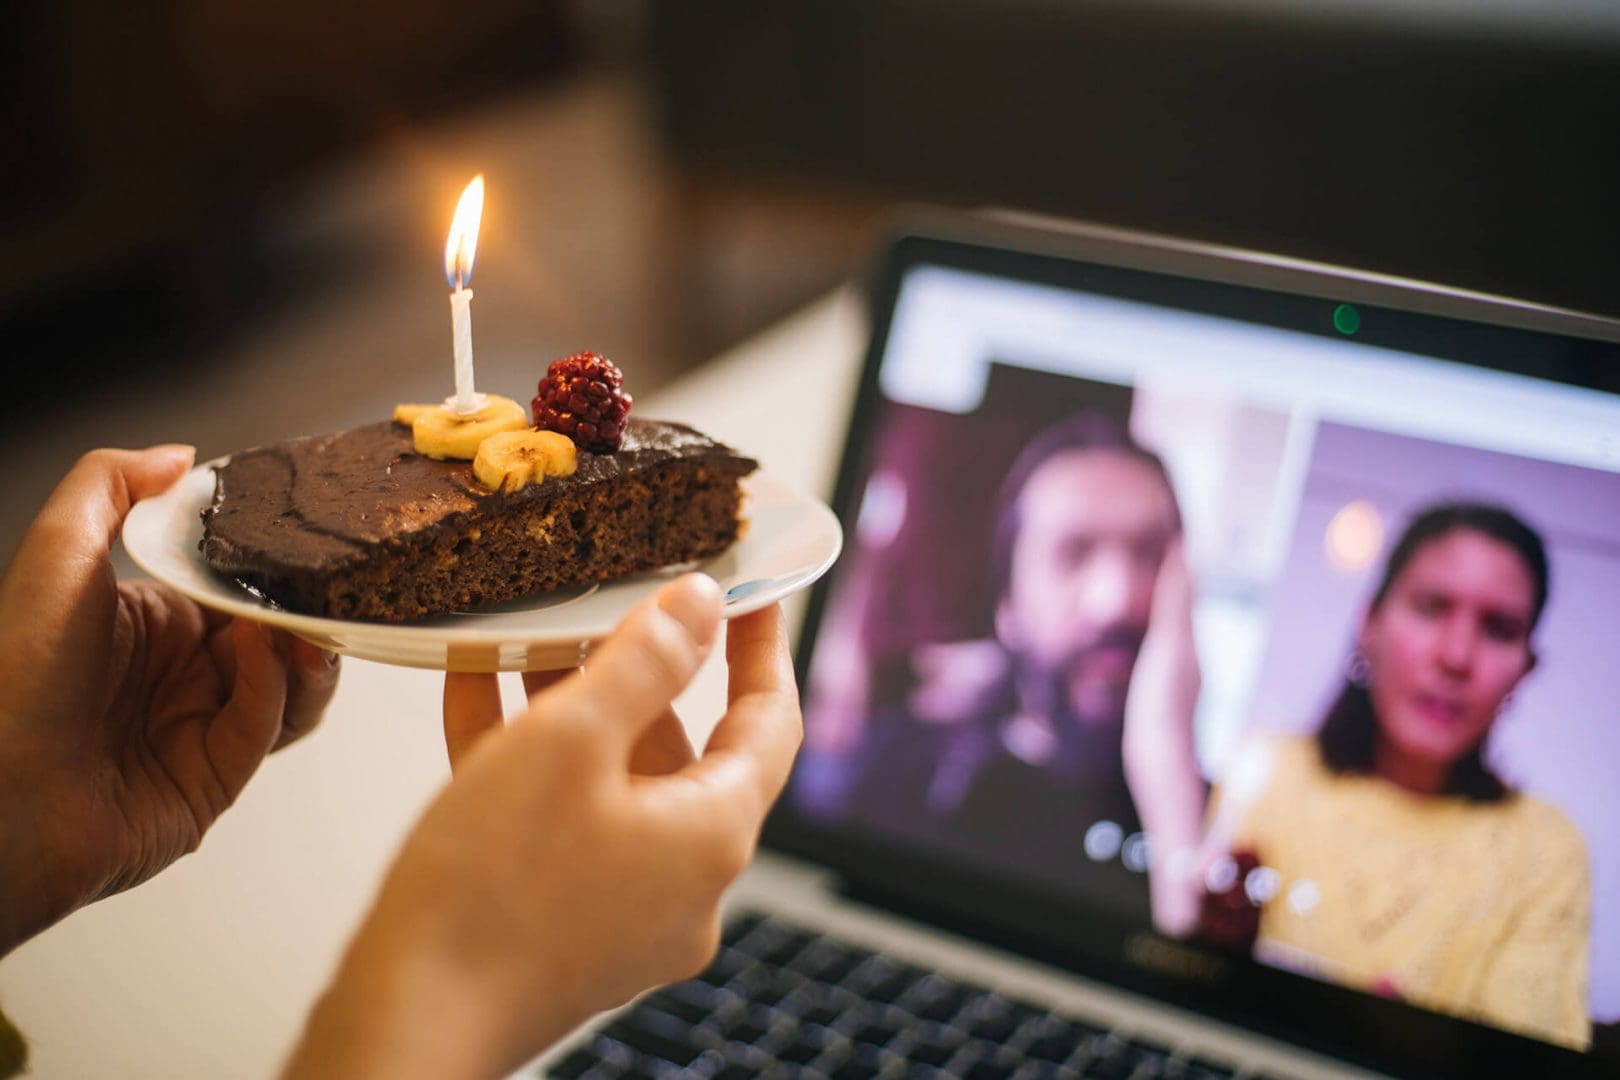 A person holding a cake with a candle in front of a laptop screen.